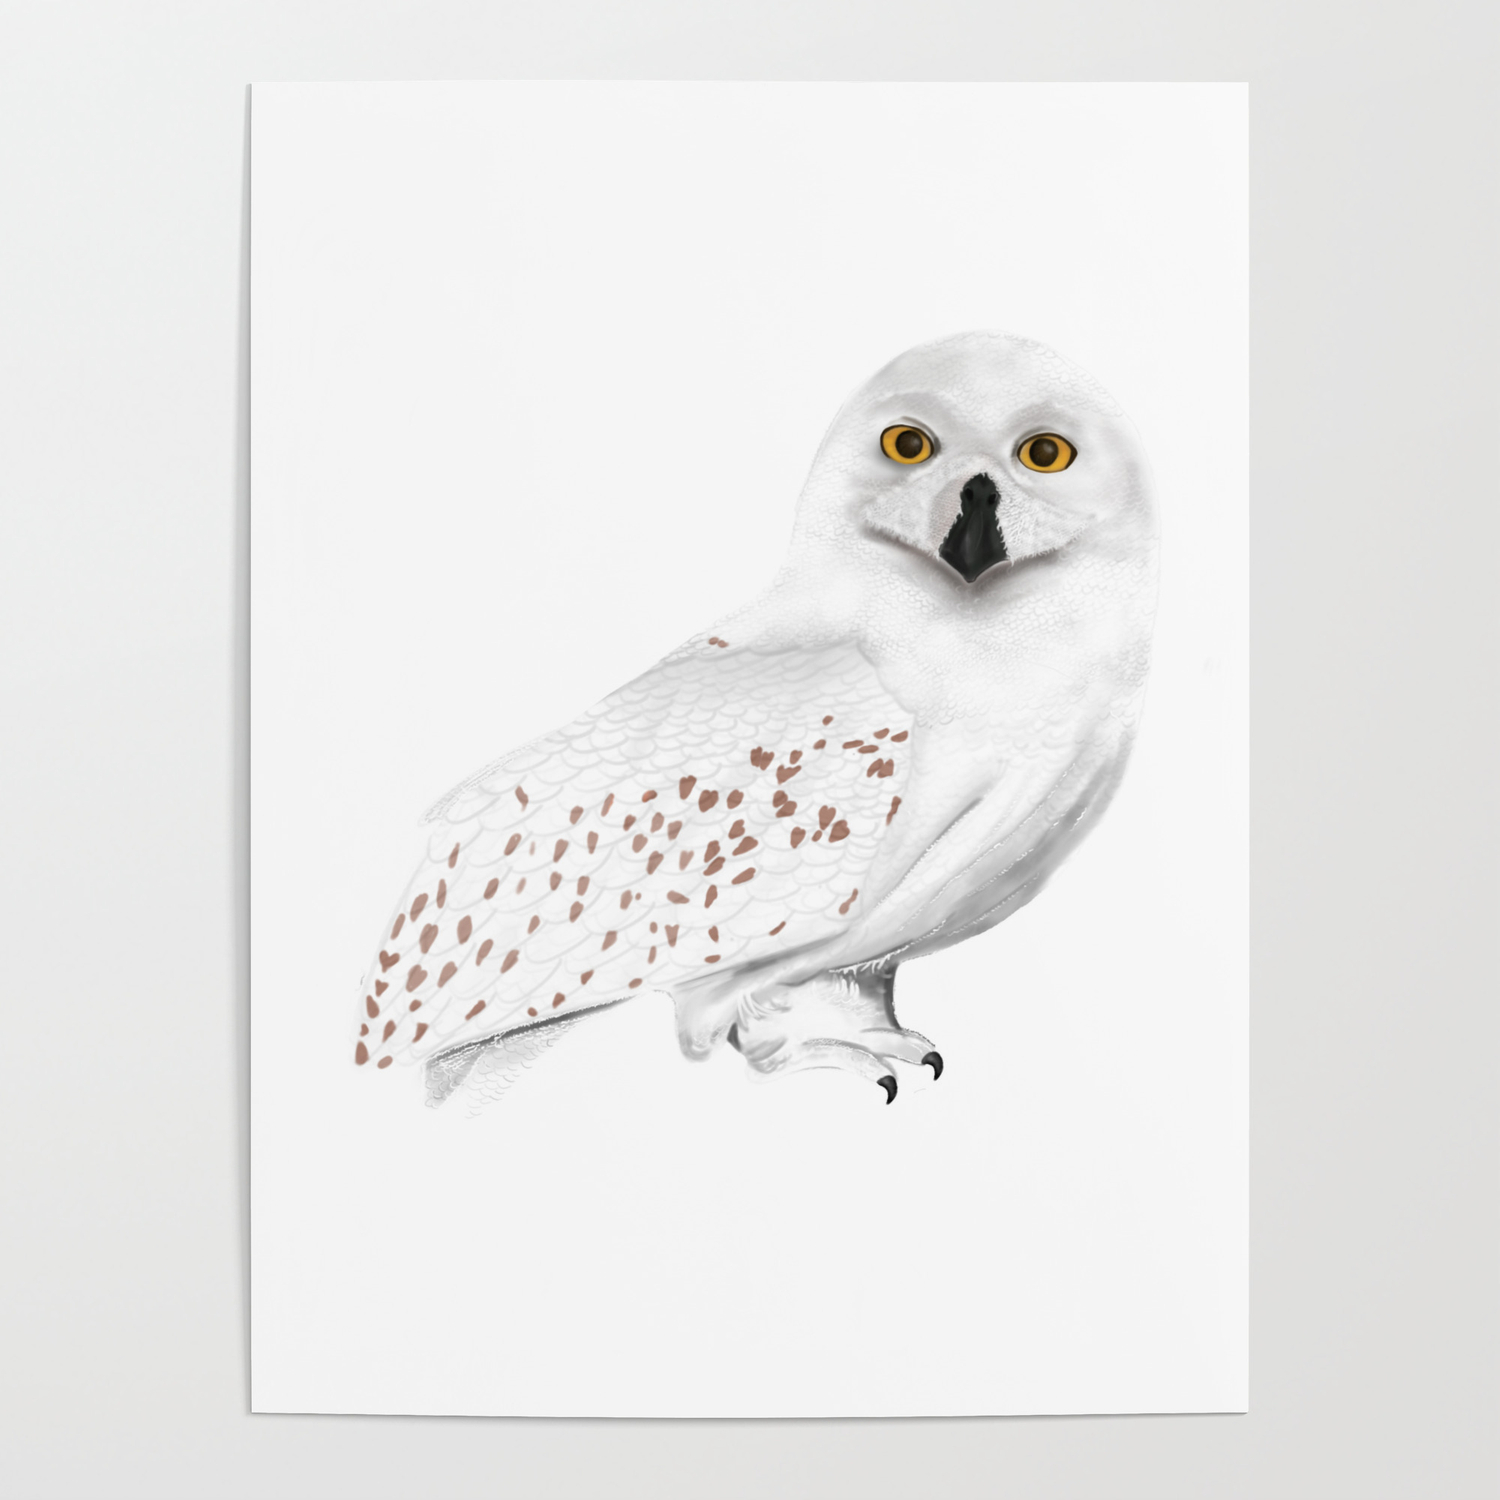 Harry Potter's Hedwig owl Poster